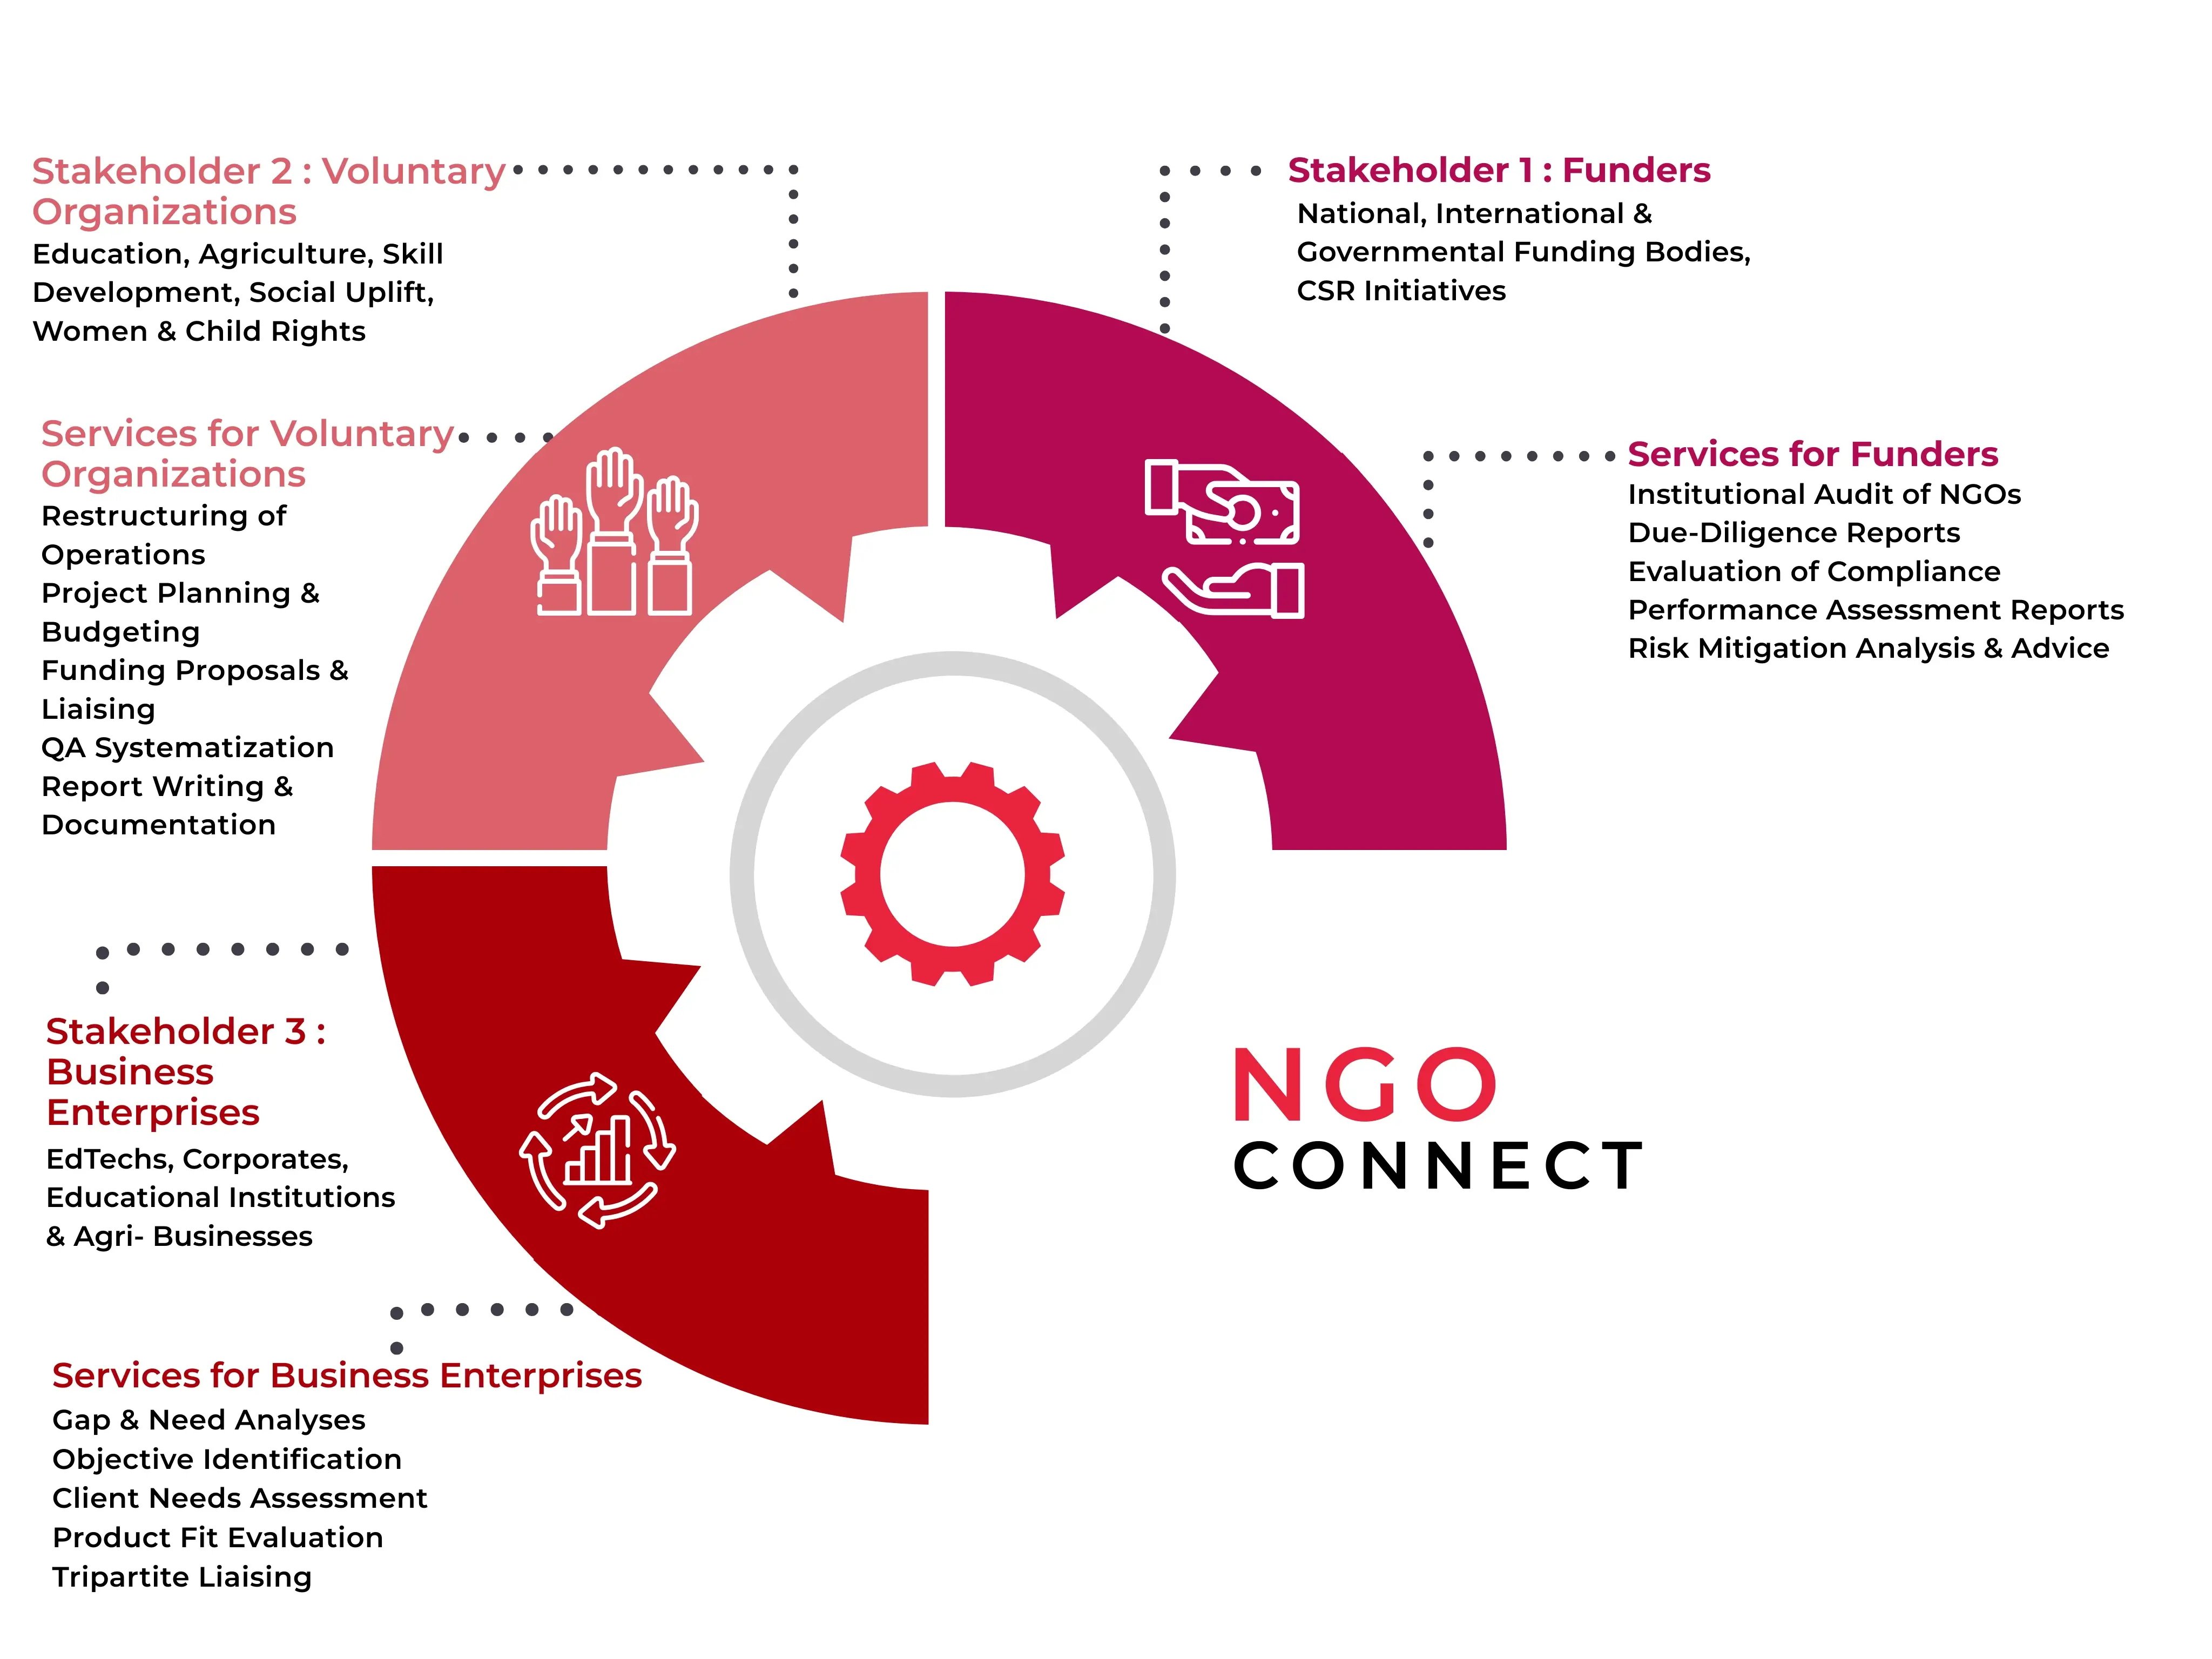 ngo connect infographic